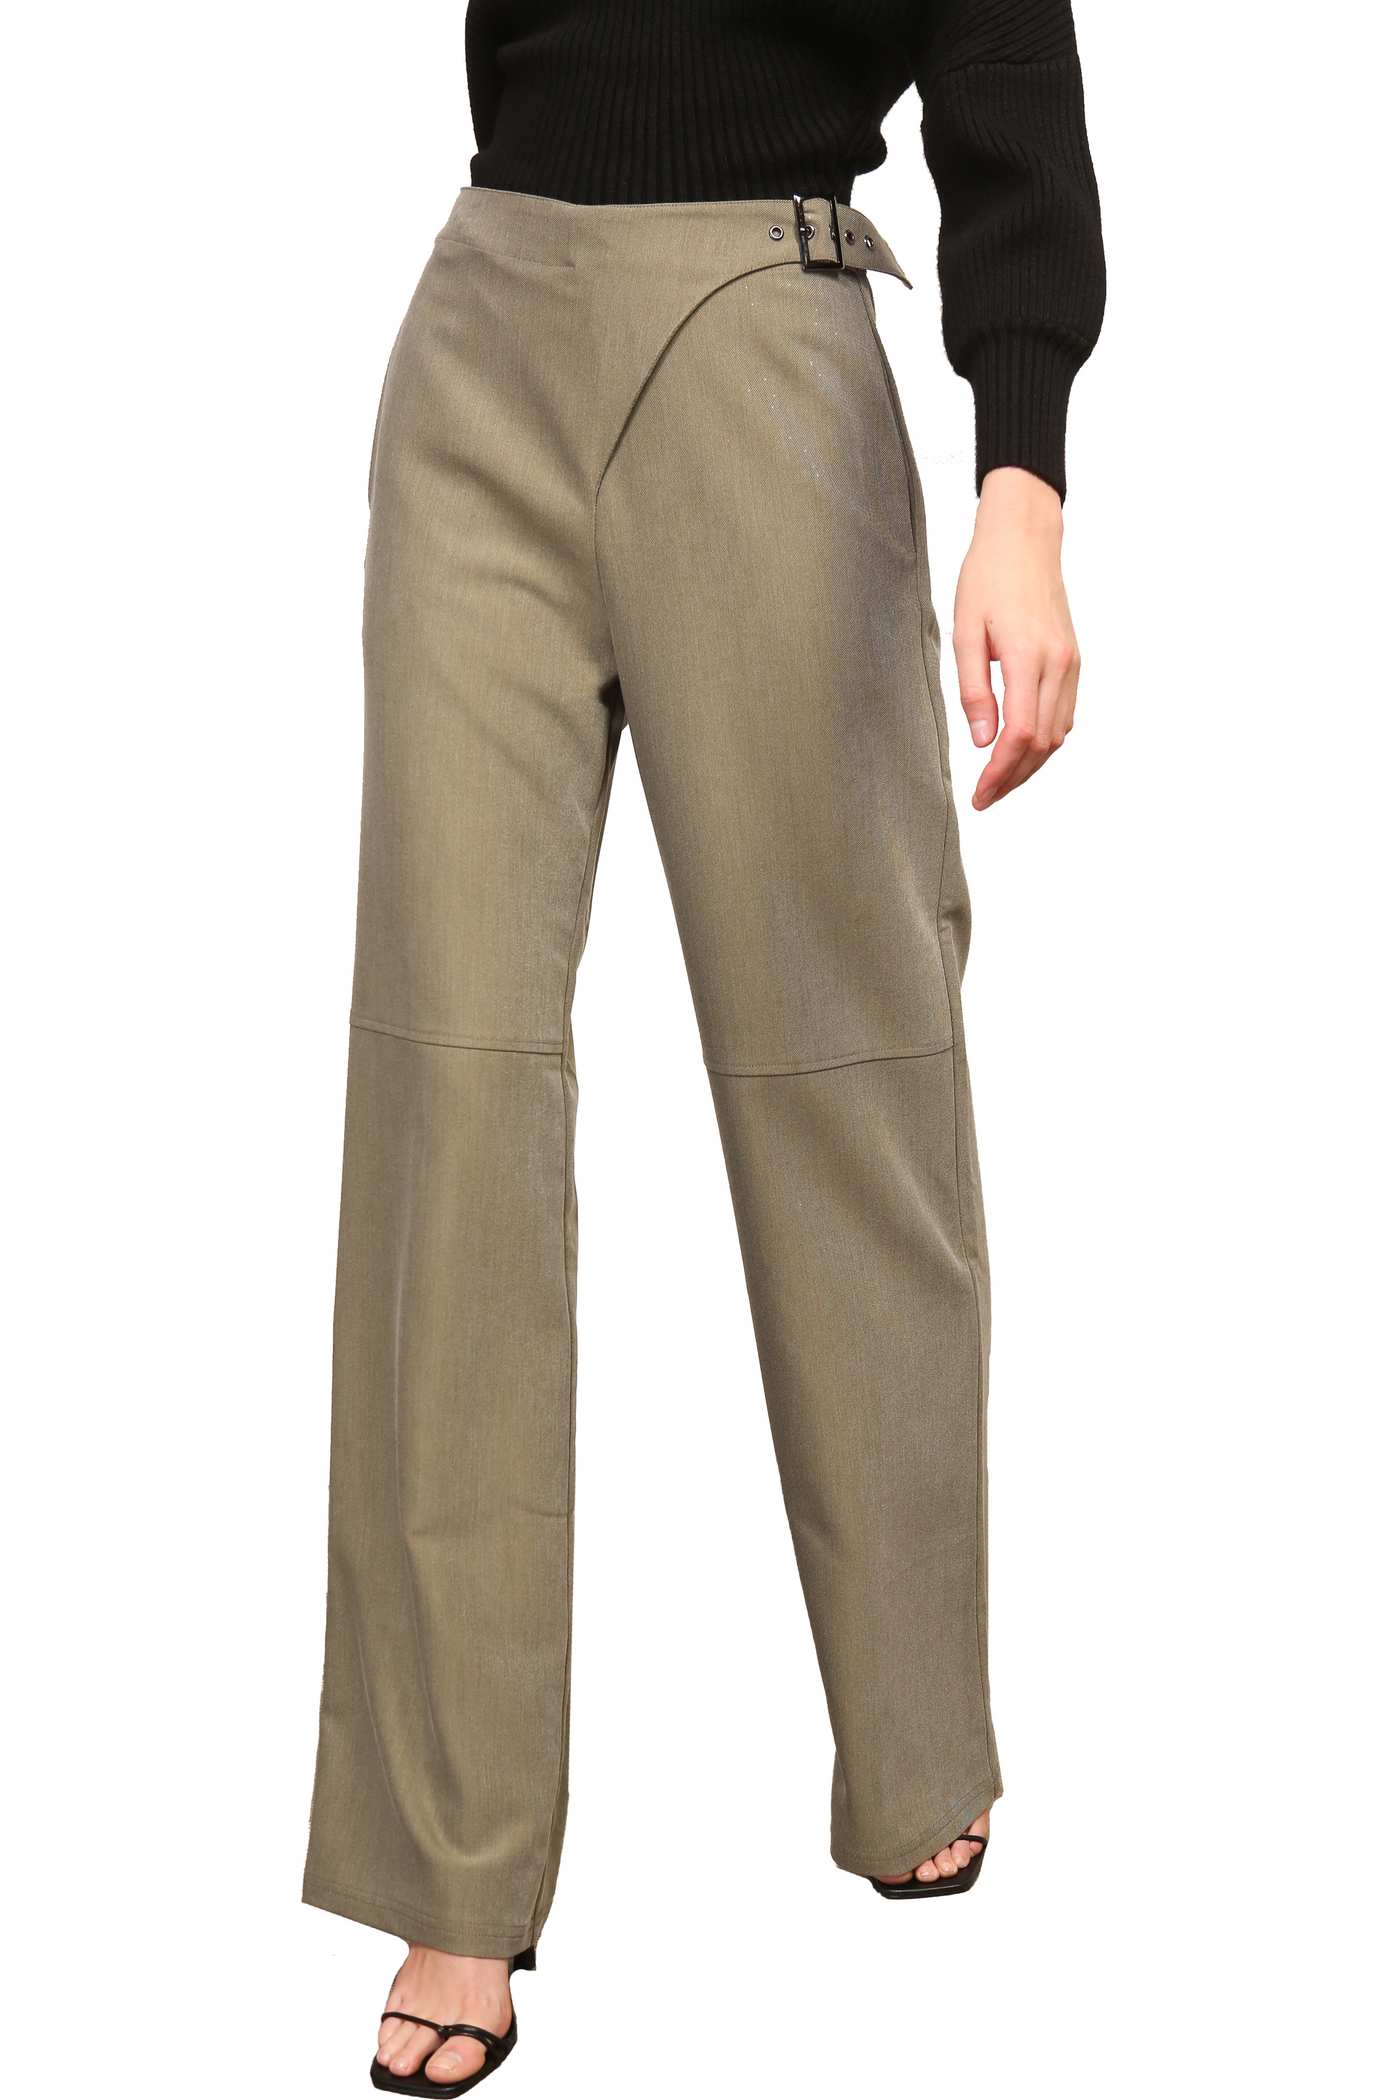 line and dot: alexis wide leg pant with waist buckle belt detail